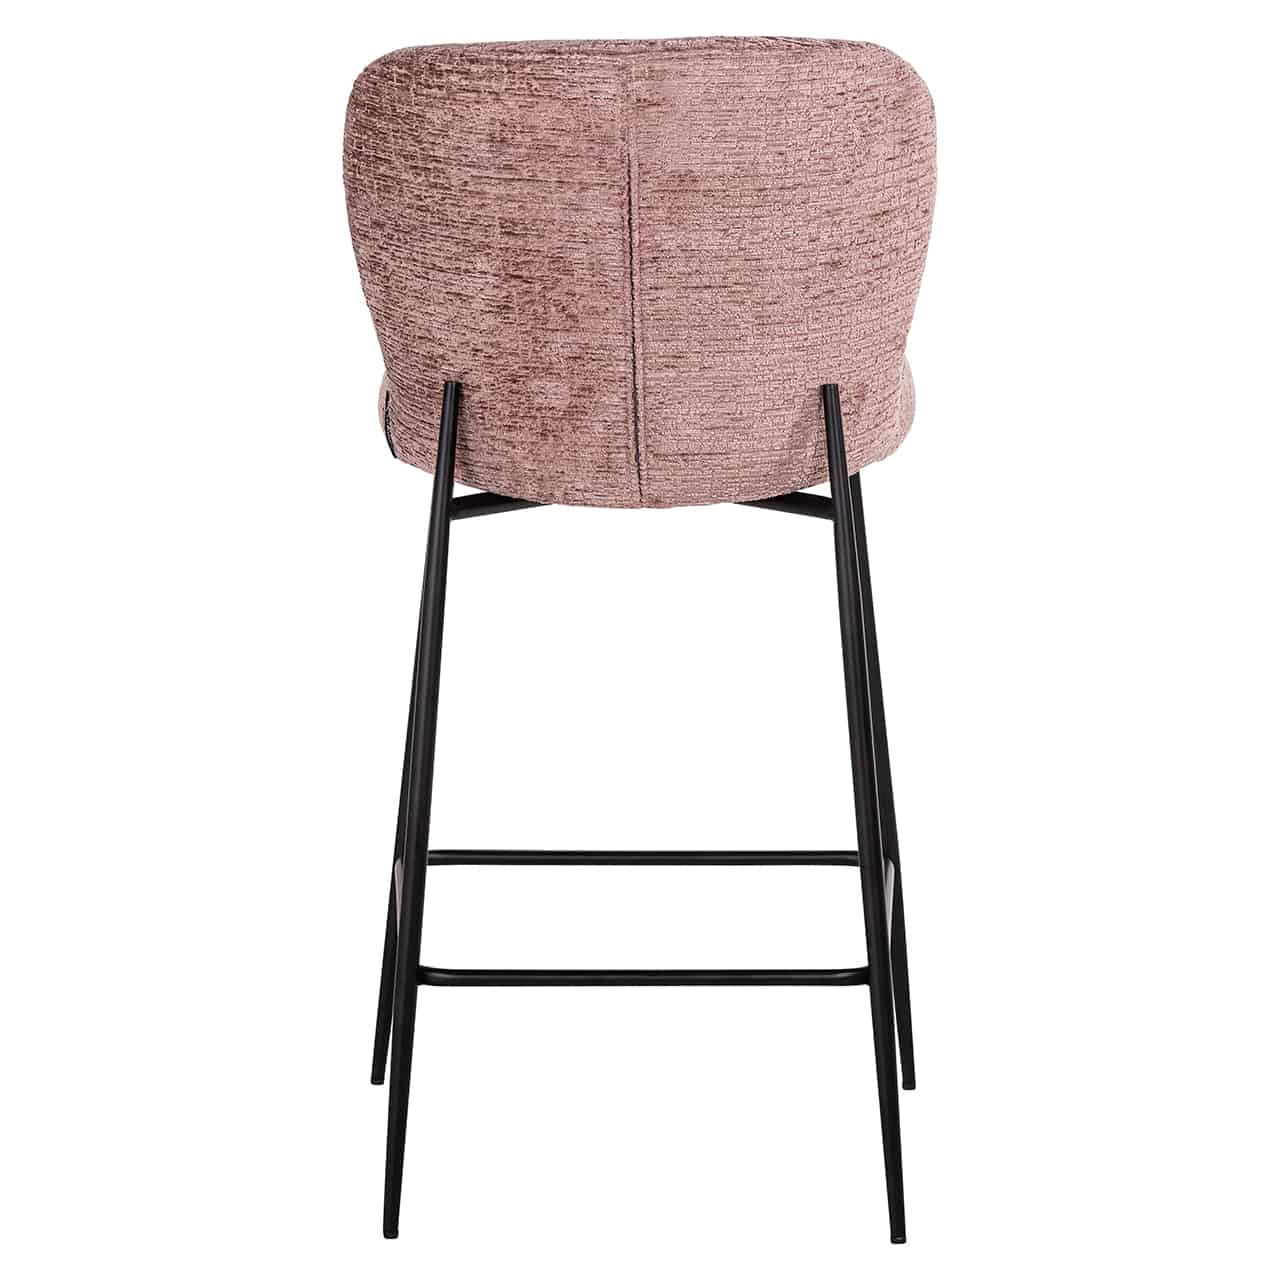 Counter stool Darby pale fusion fire retardant (FR-Fusion pale 200)